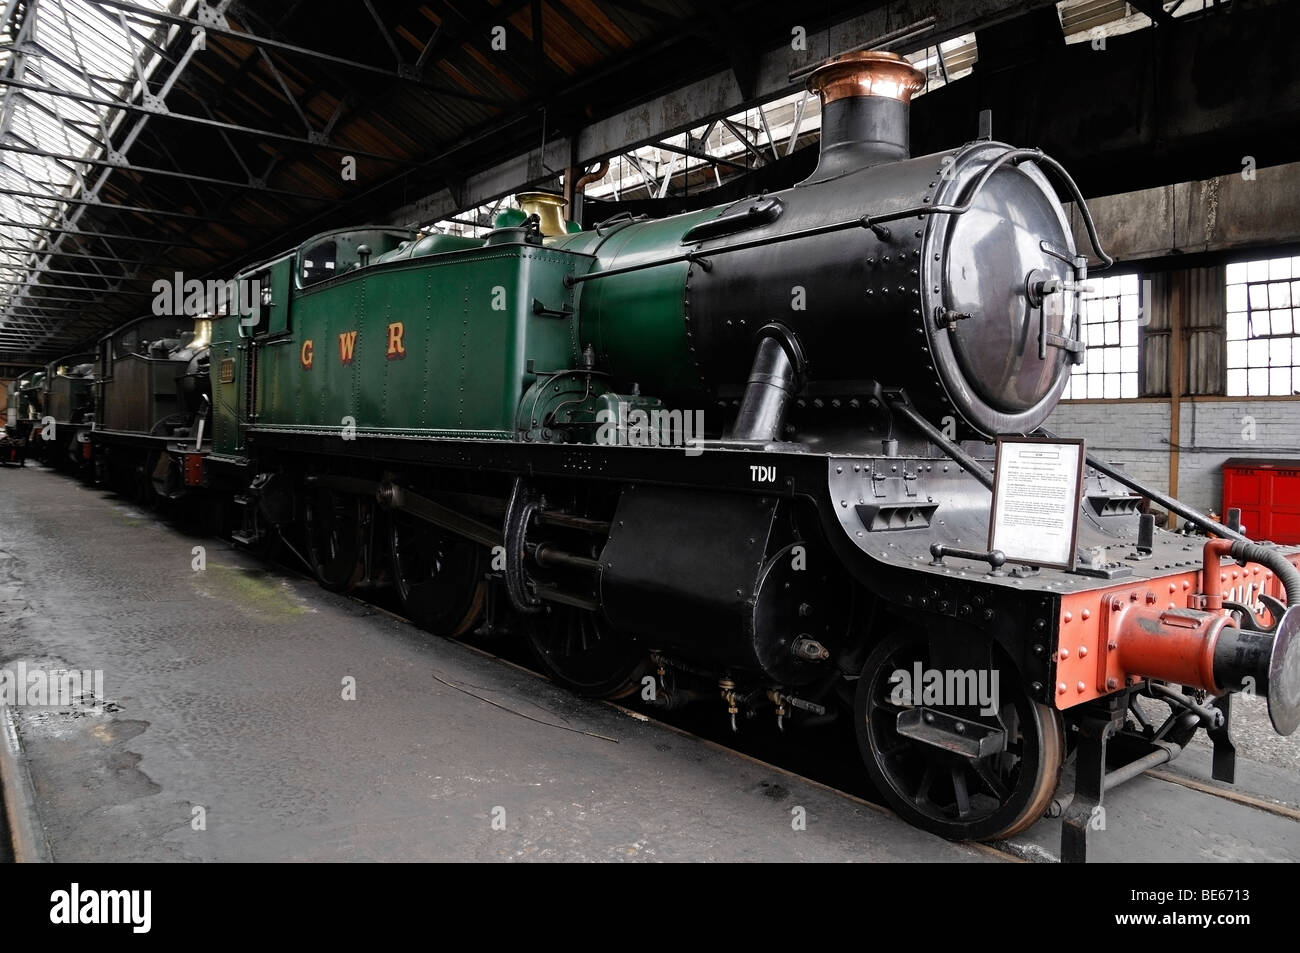 Engine Shed at Didcot Railway Centre, with Steam Train 4144. Didcot, Oxfordshire, England, United Kingdom. Stock Photo